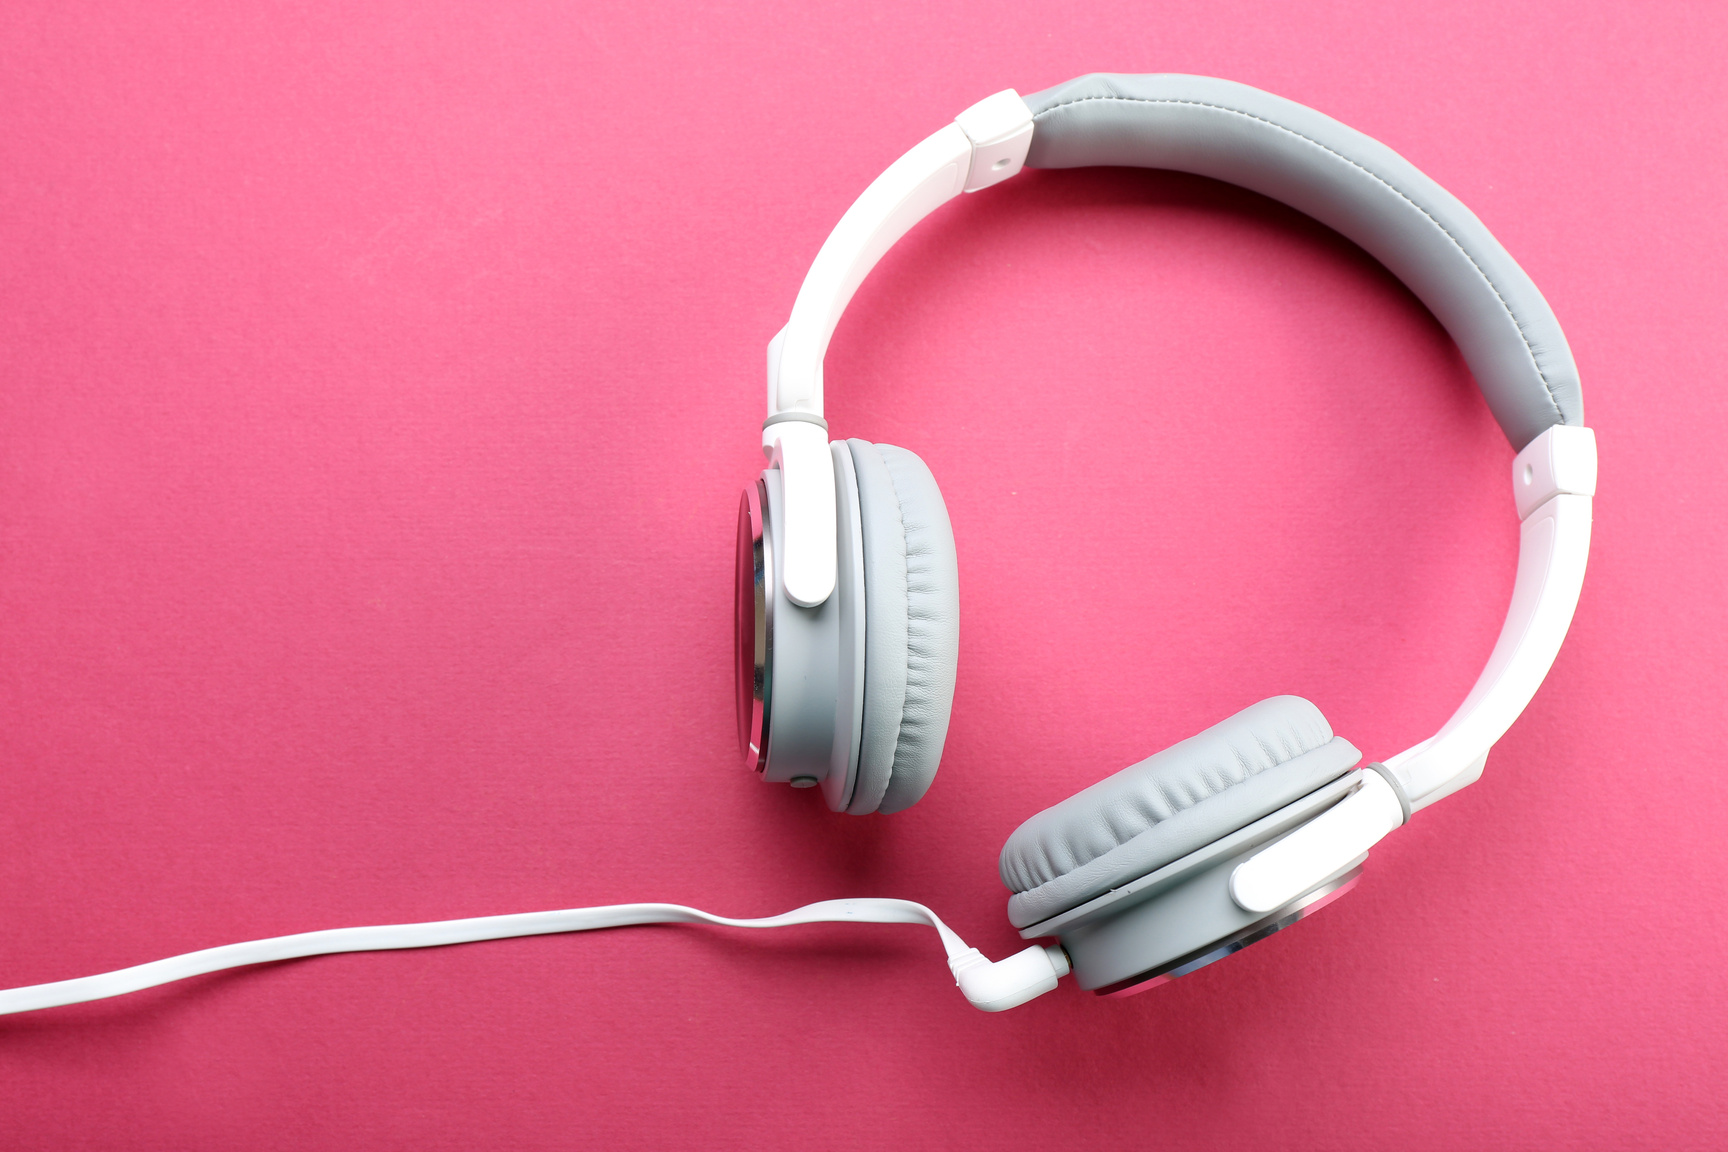 White and Grey Headphones on Pink Background